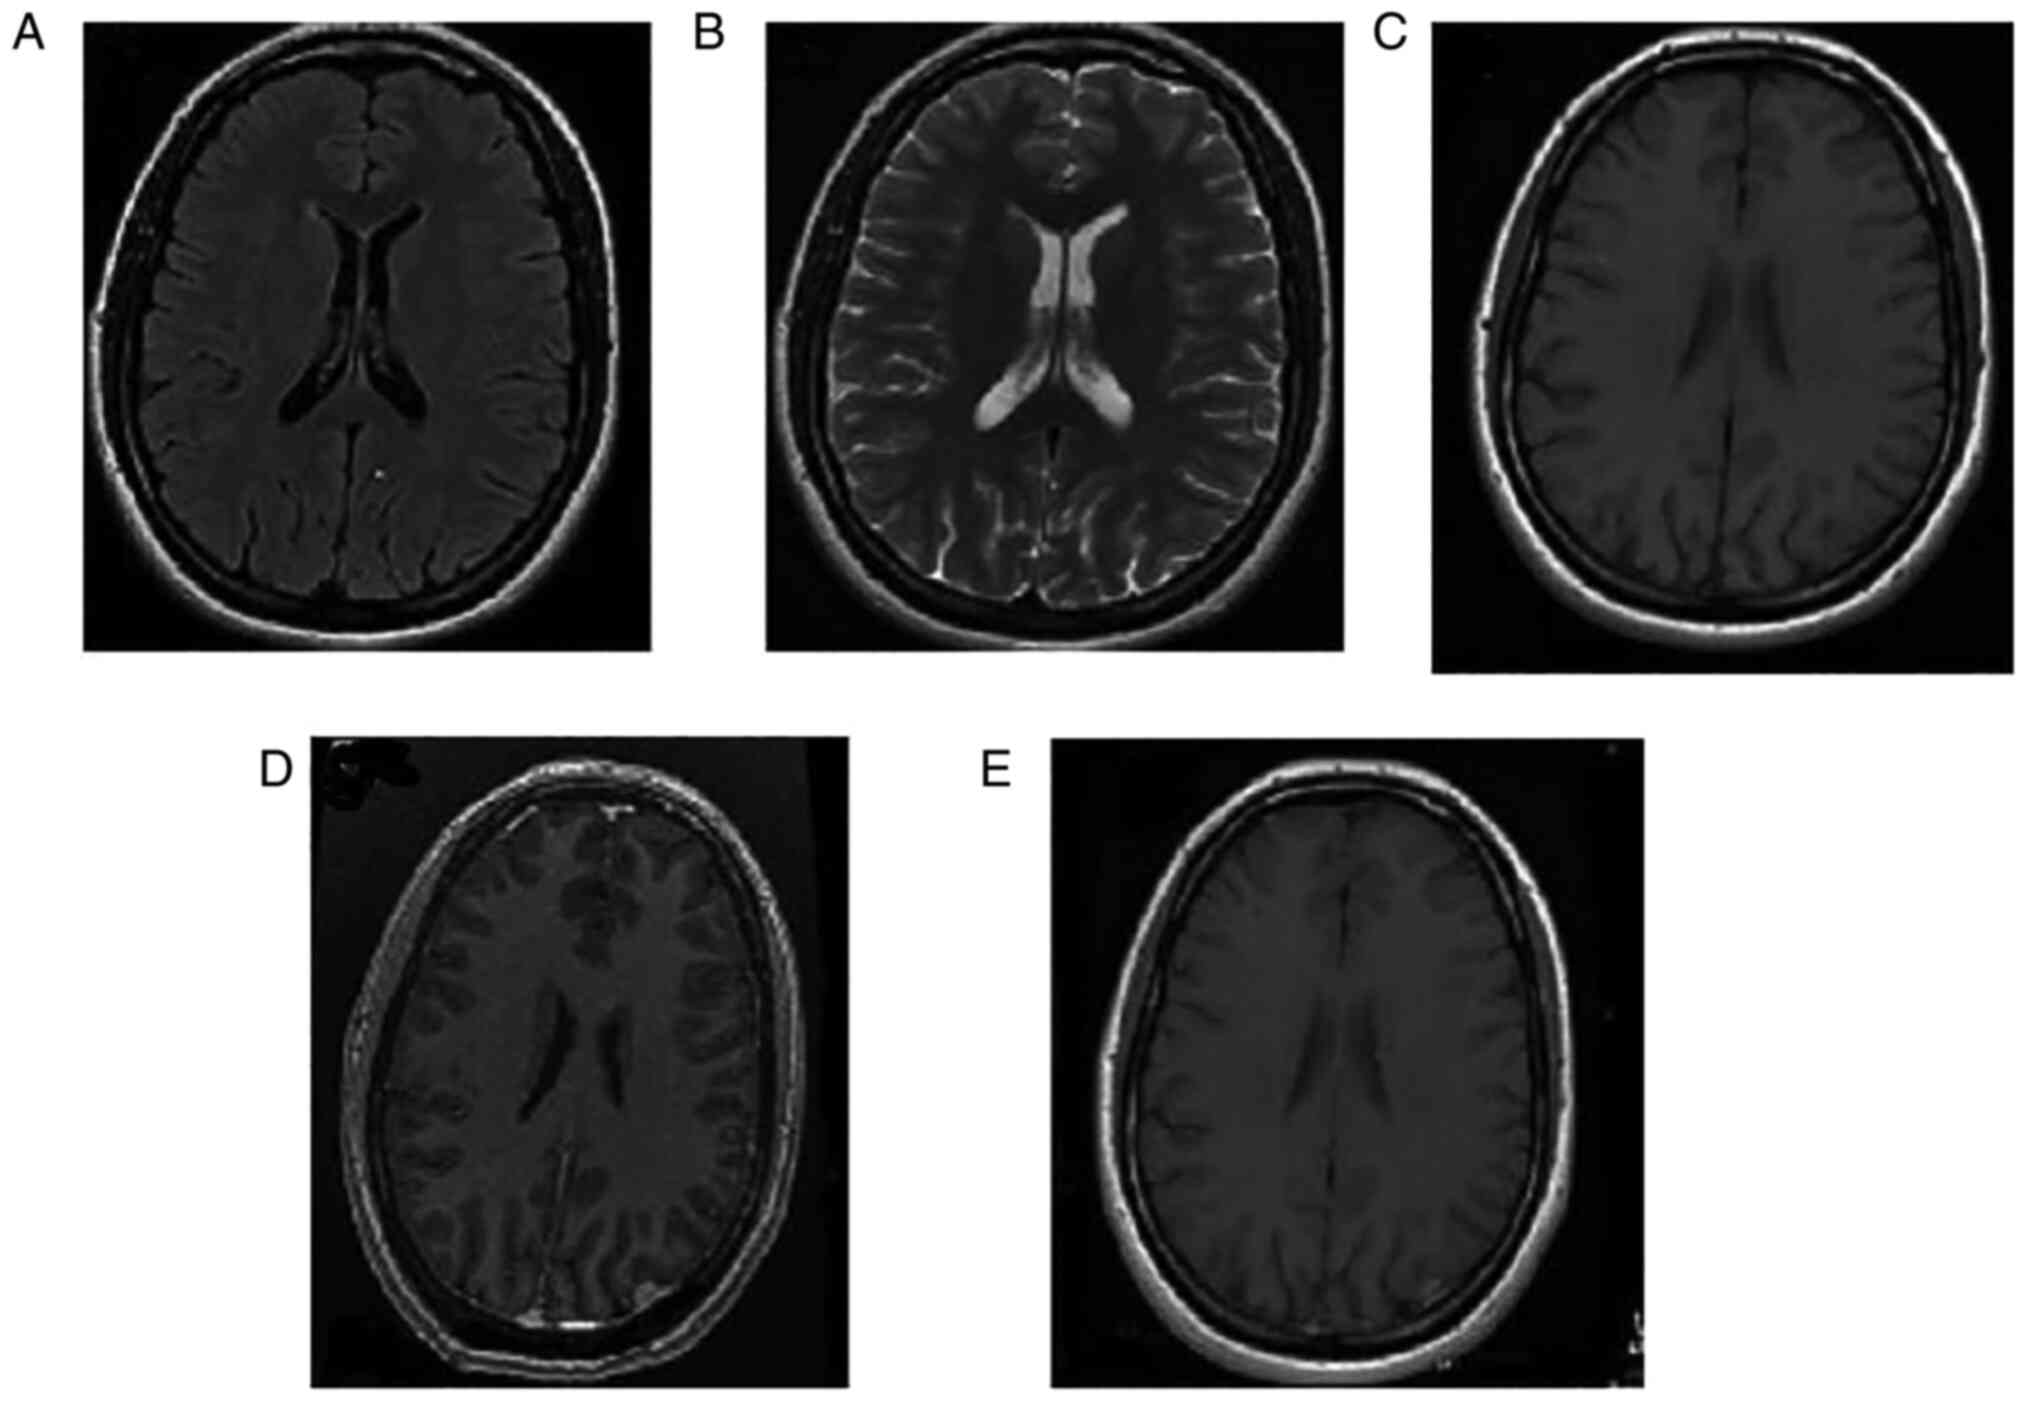 Uncommon and atypical meningiomas and imaging variants: A report of 7 cases